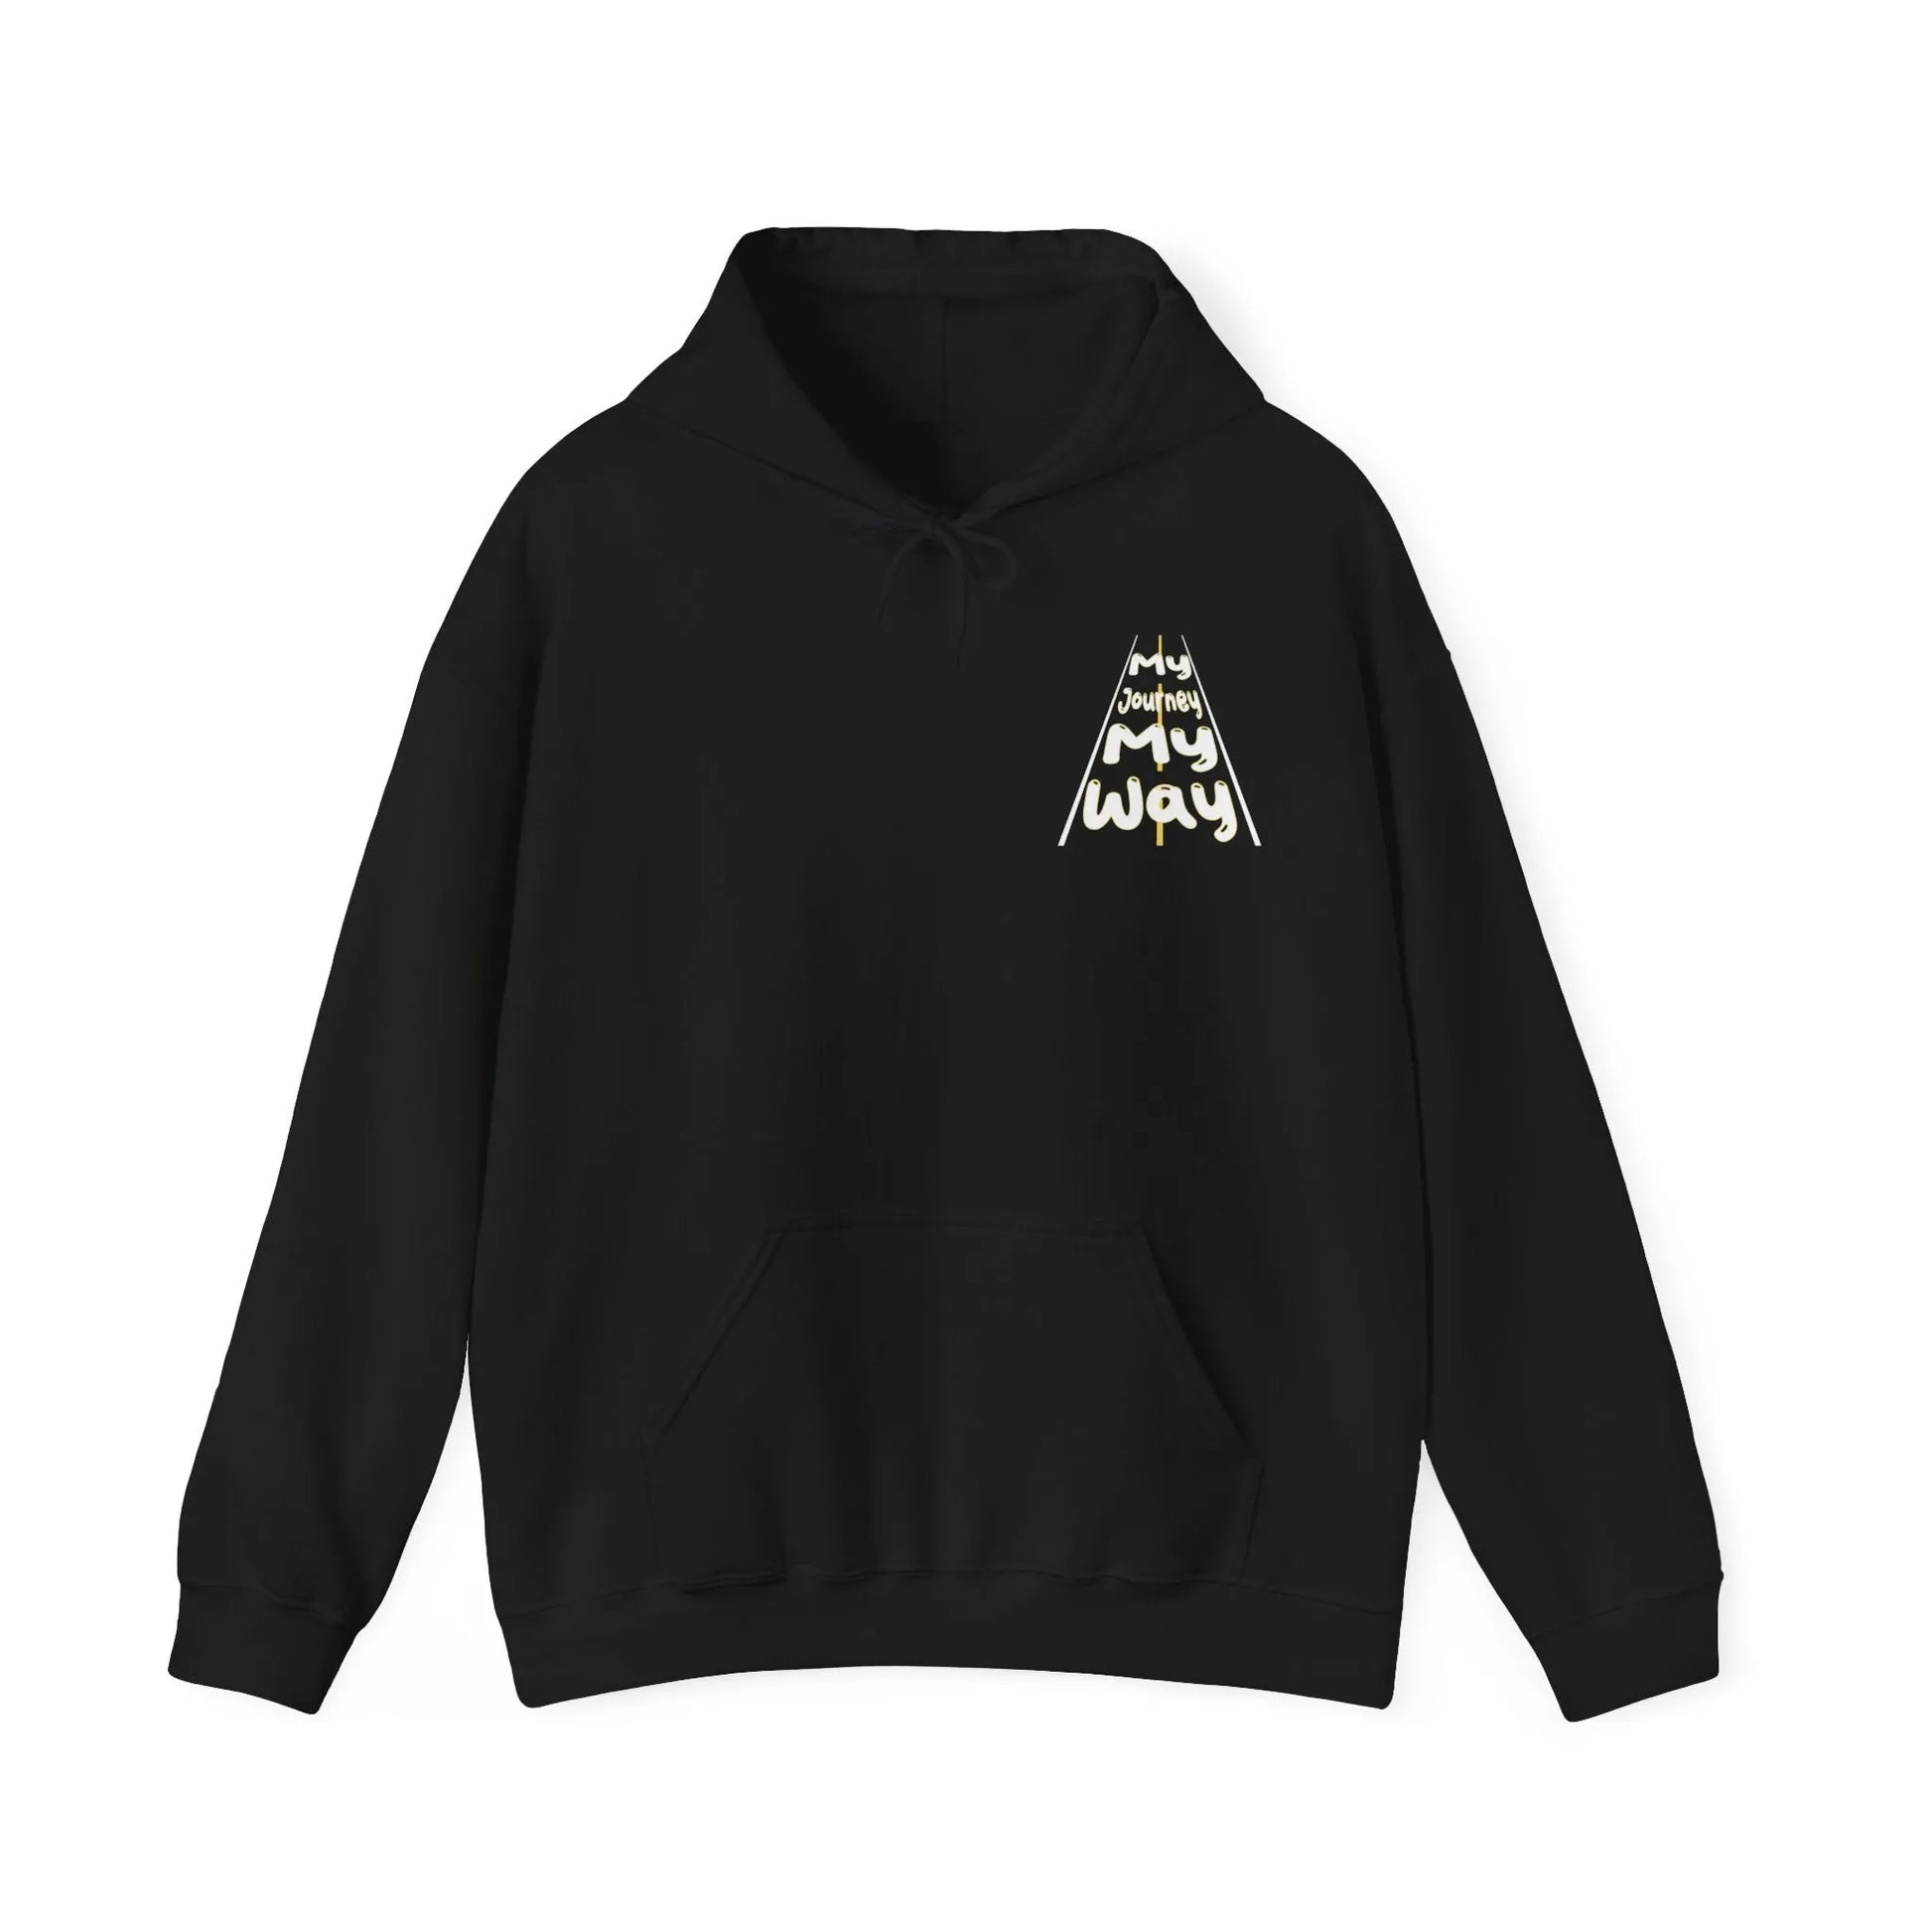 My Journey My Way: Stay In Your Lane Hooded Sweatshirt - Stay In Your Lane Sweatshirt - Trendy  Graphic Hoodie Front View